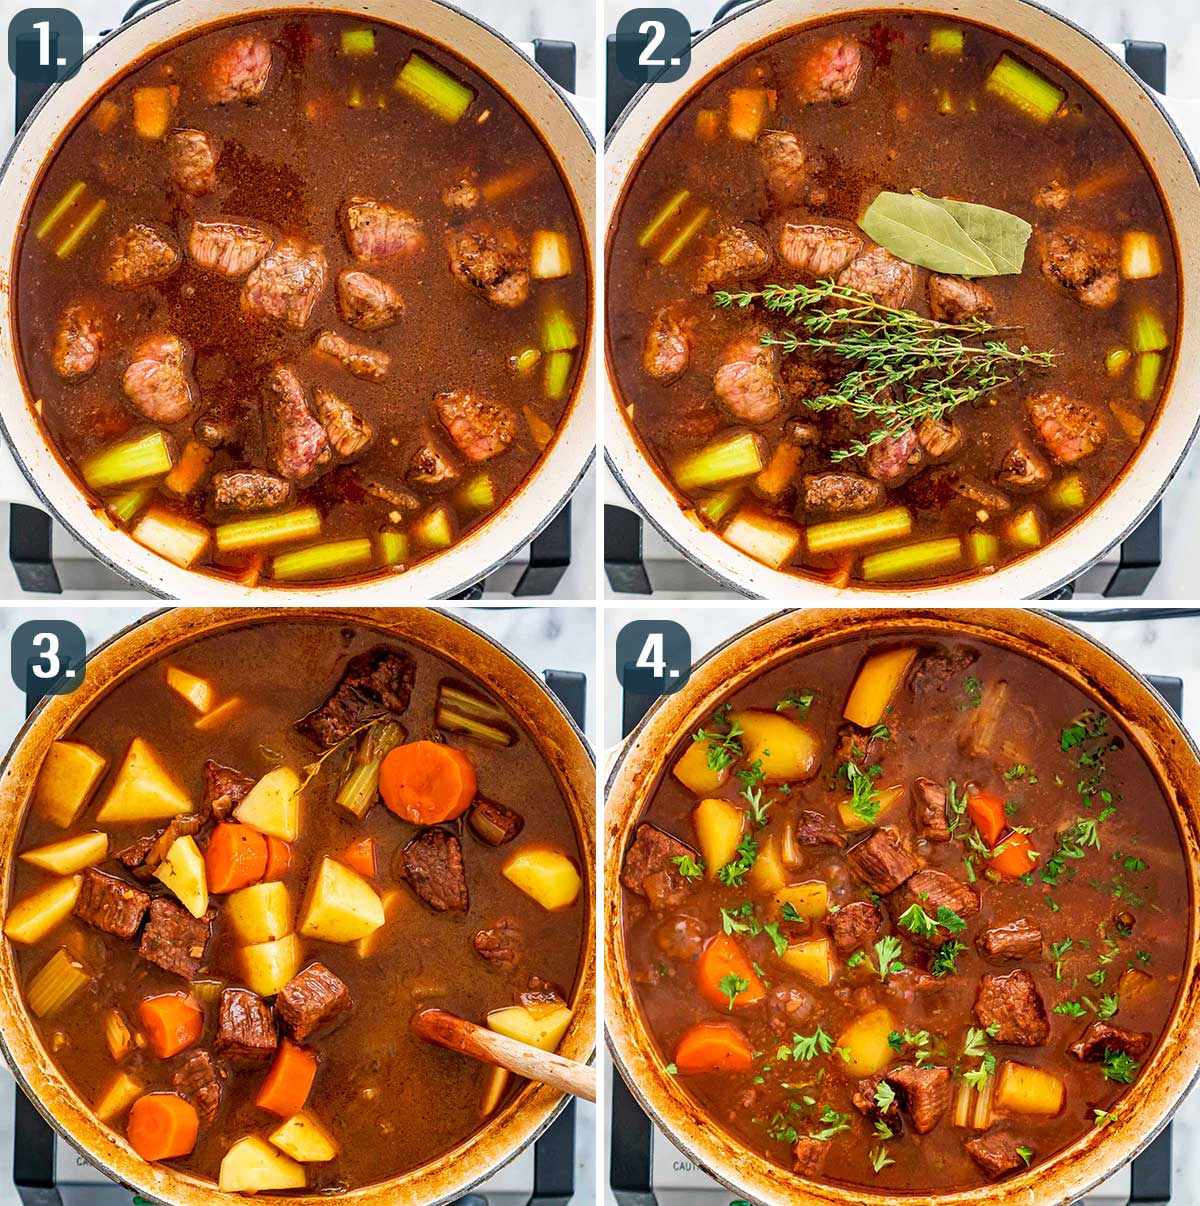 process shots showing how to cook beef stew.